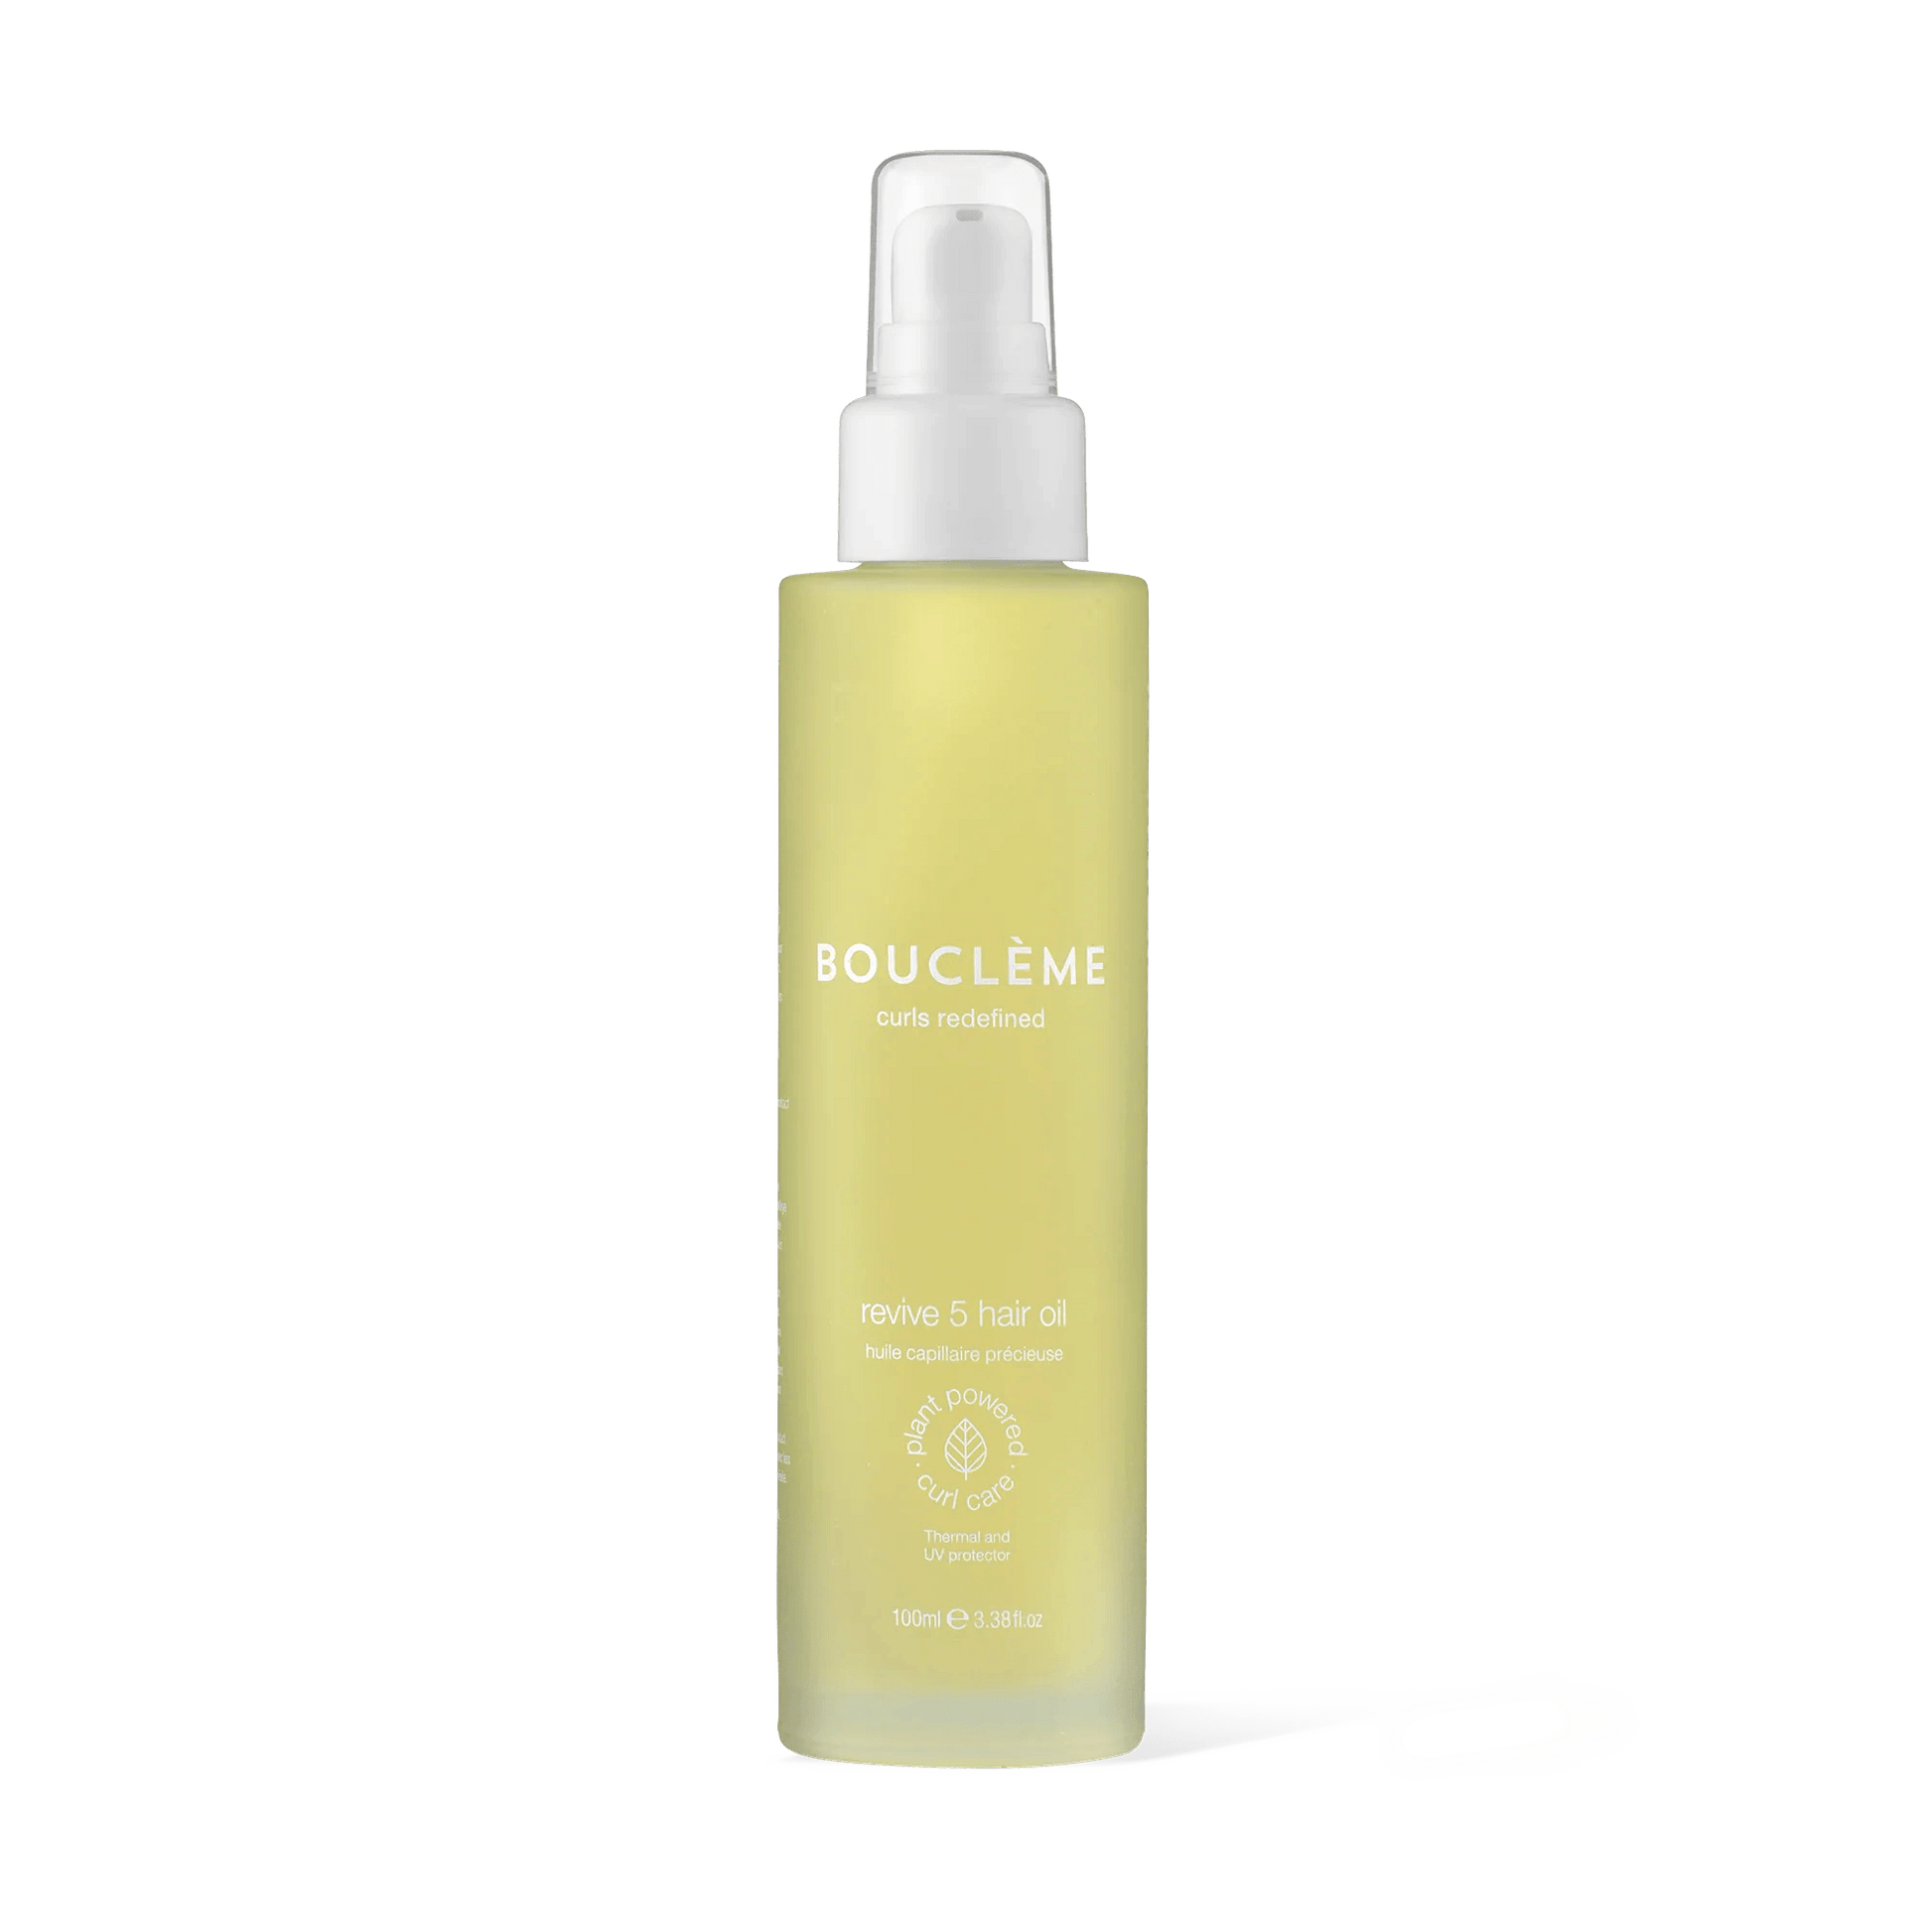 A nutrient rich, lightweight oil by Boucleme that conditions and protects hair against humidity.